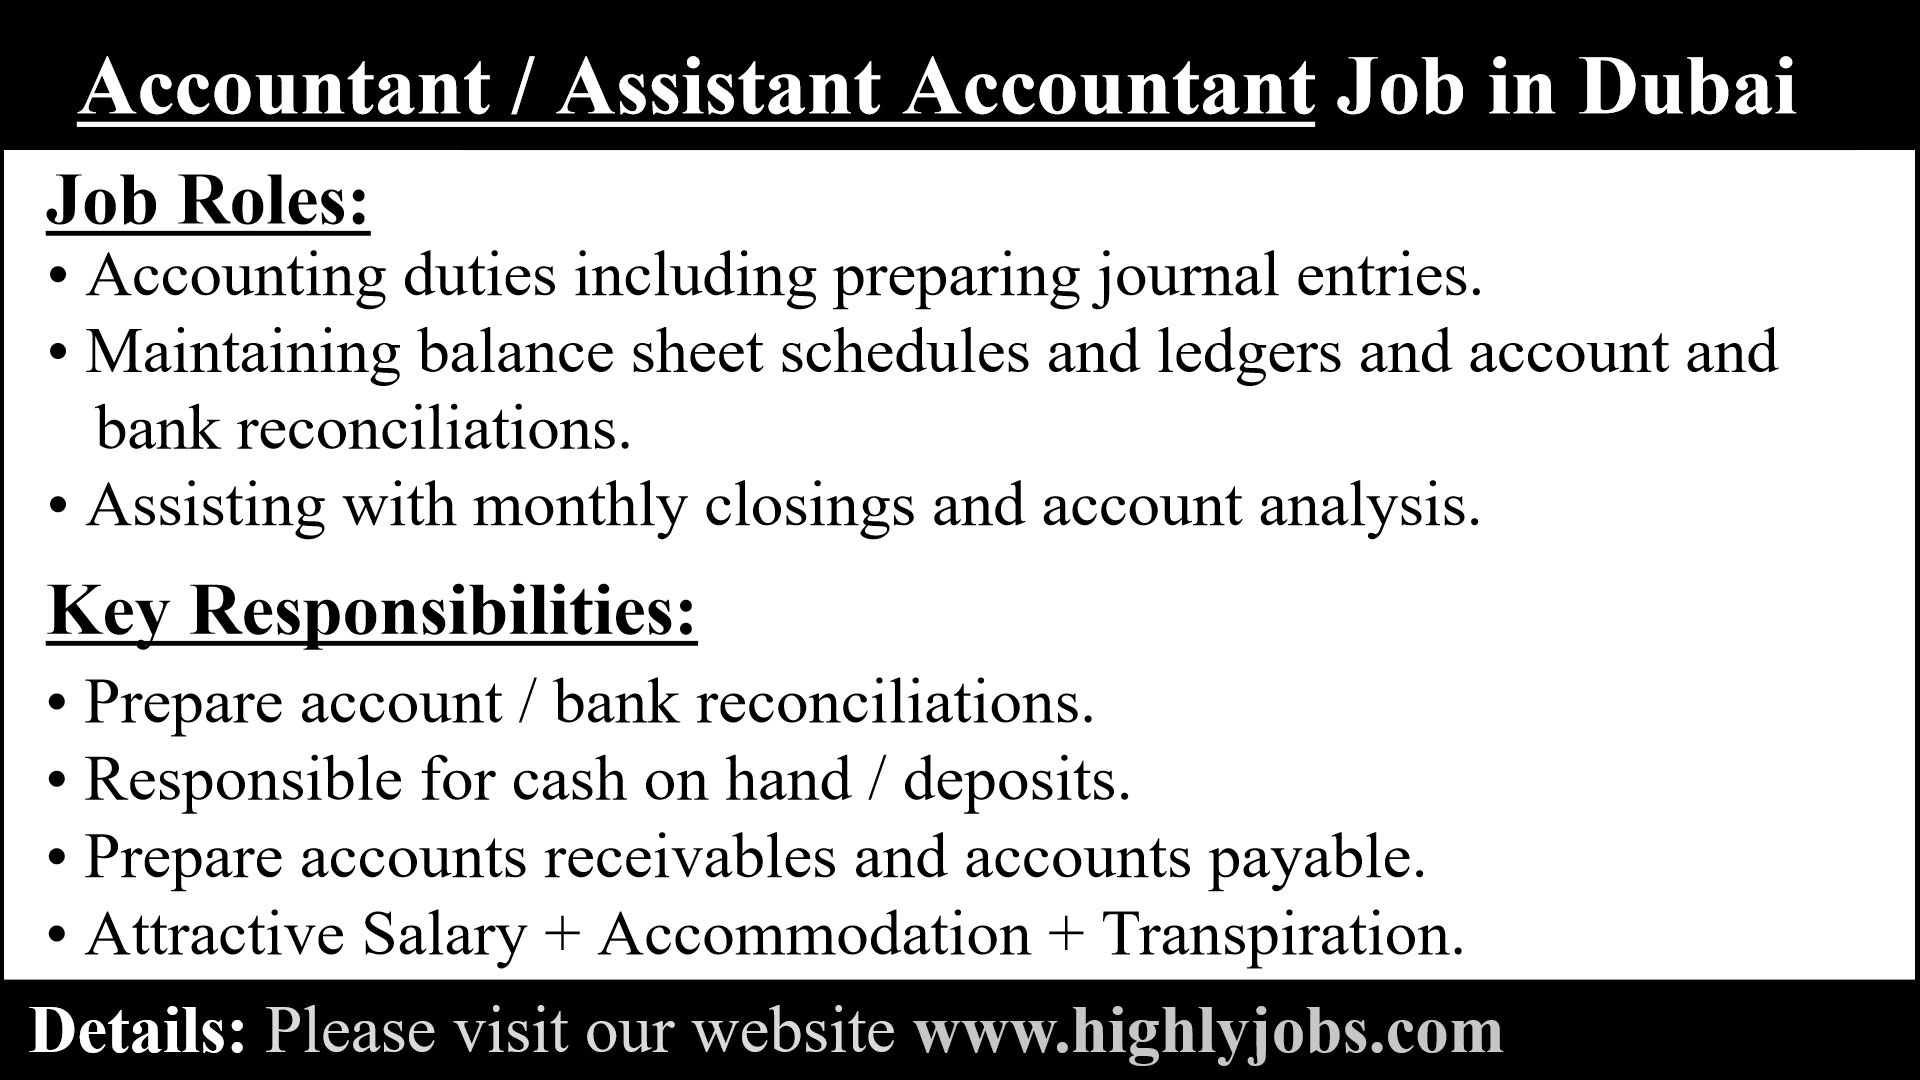 Accountant and Assistant Accountant Job in Dubai